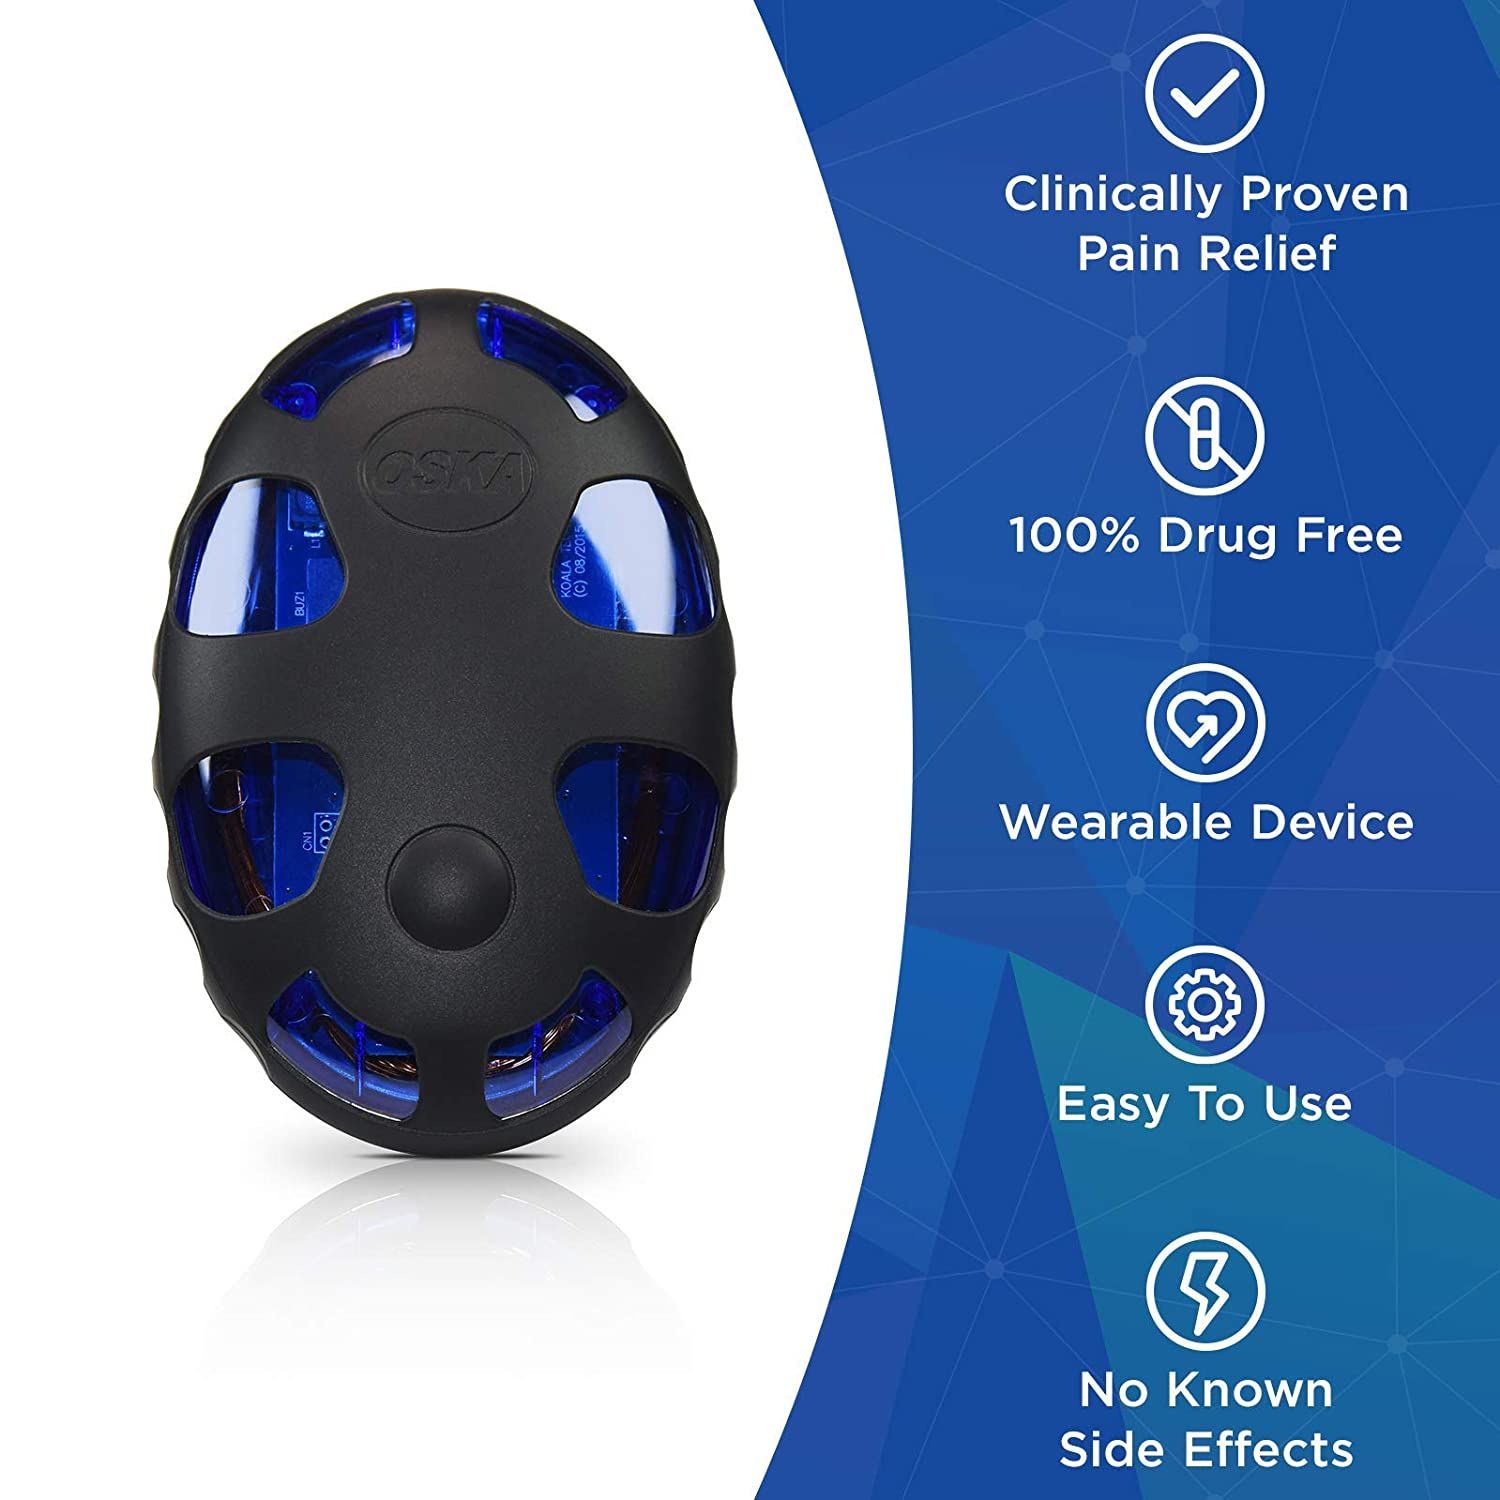 Oska Pulse Electromagnetic Pain Therapy Device